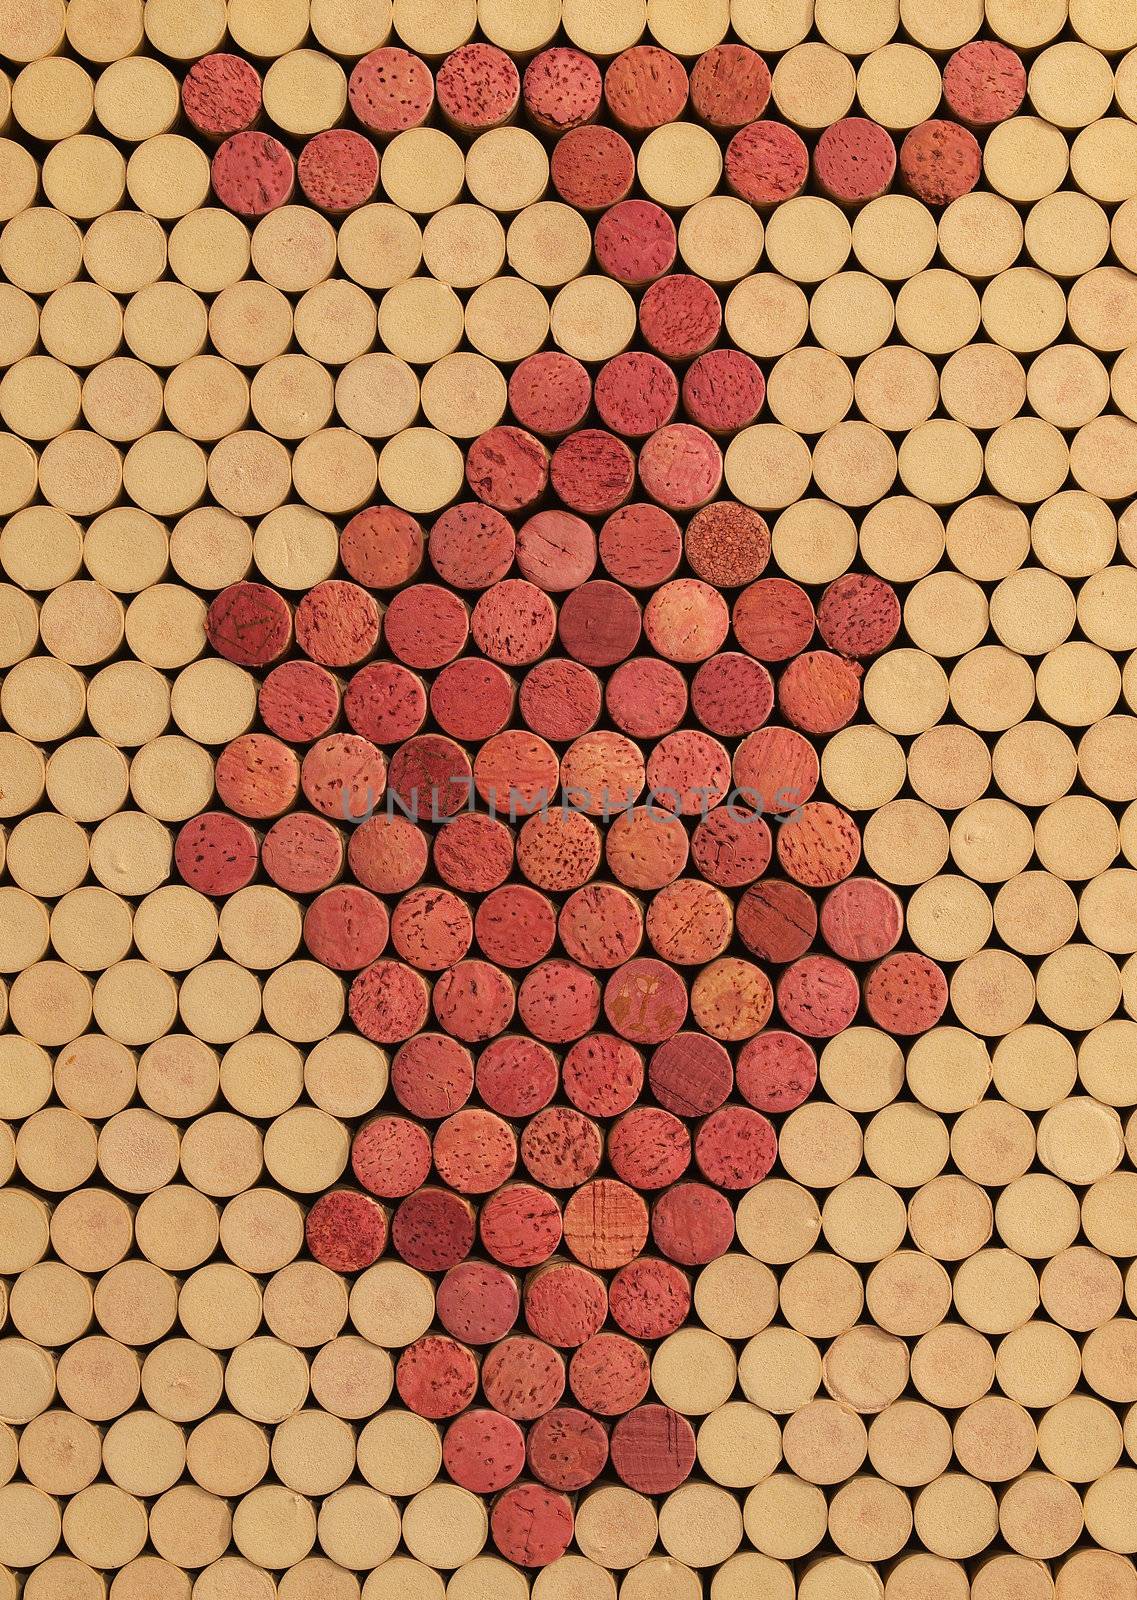 Used Wine Corks Grape Cluster Pattern for Background